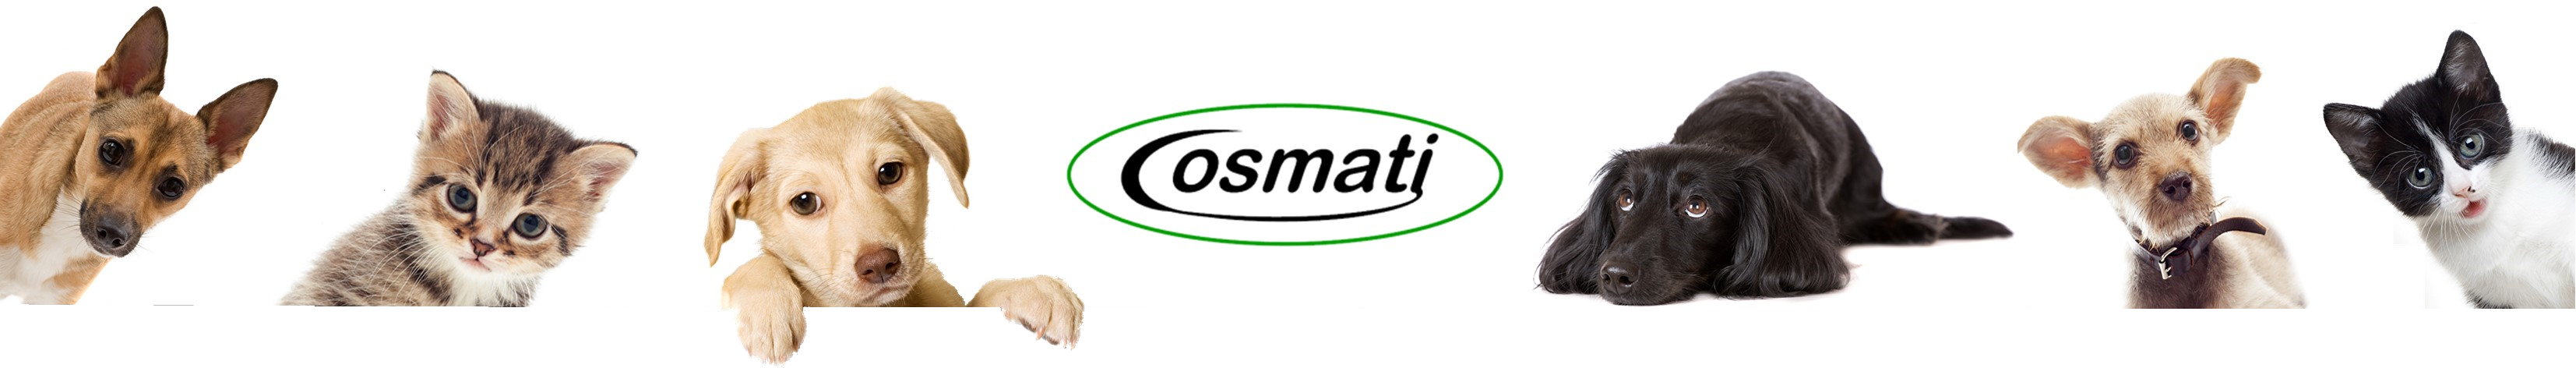 Cosmati for Dog